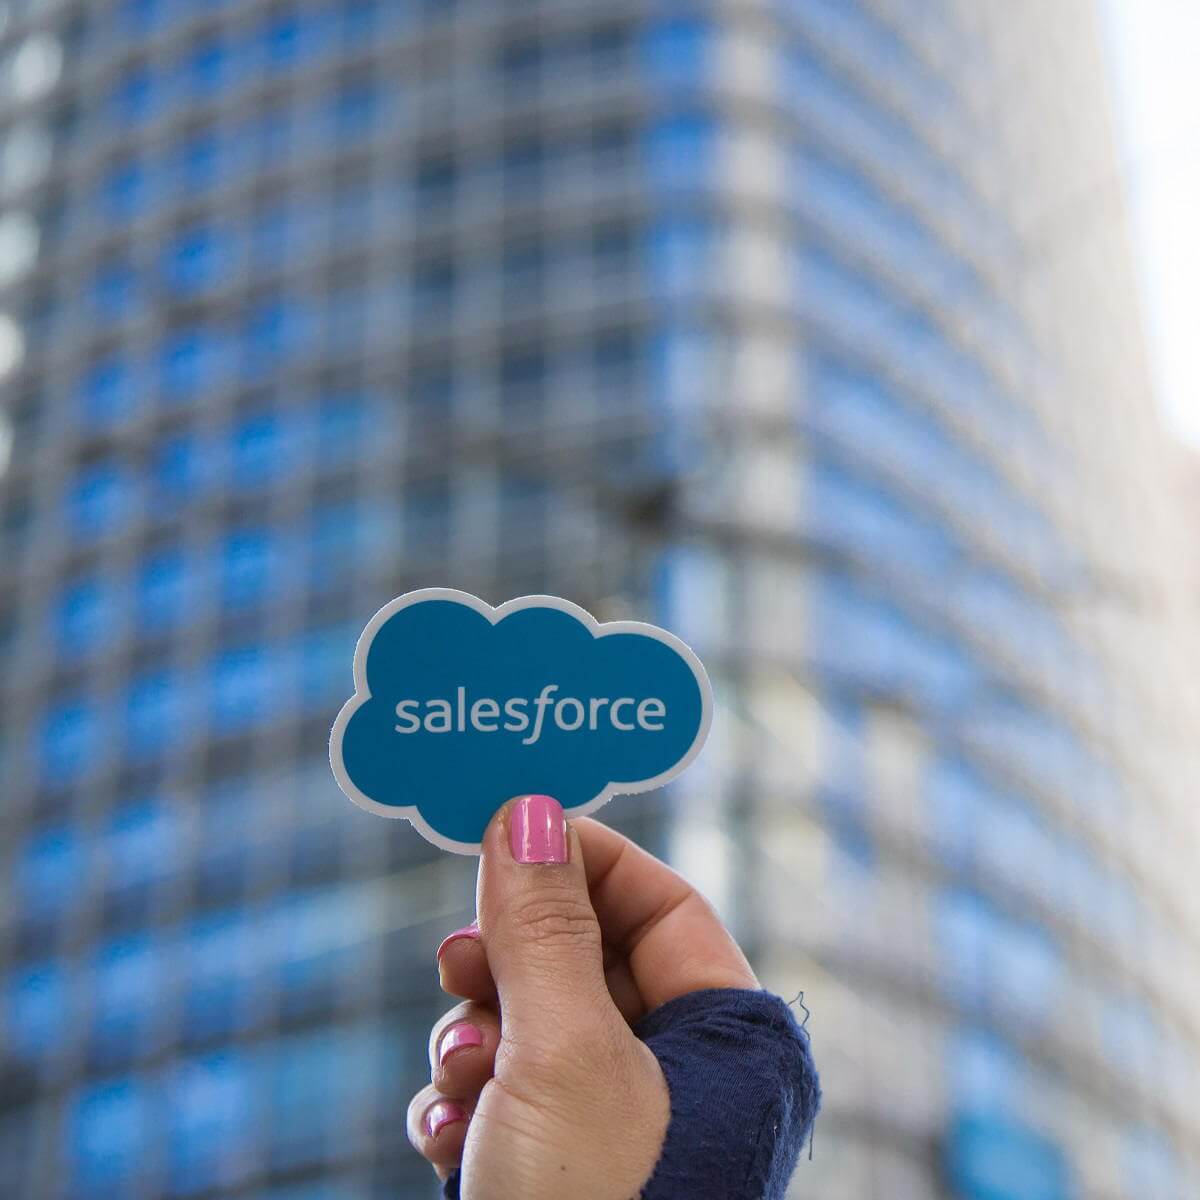 Salesforce sign in not working in Windows 10